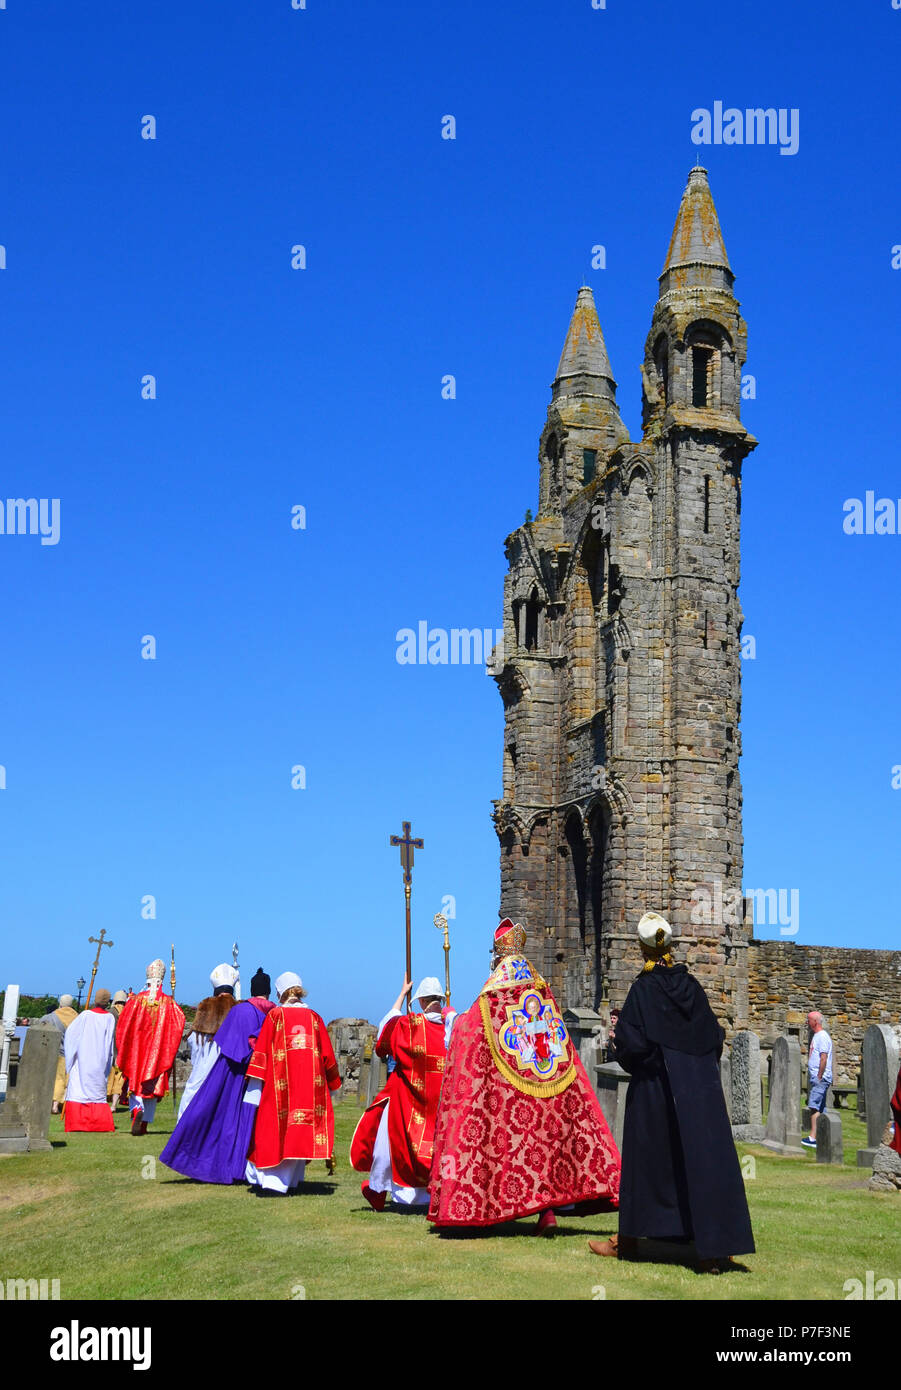 Historical pageant in July 2018 celebrating  the 700th anniversary of the consecration of St Andrews Cathedral -  St  Andrews, Fife, Scotland Stock Photo